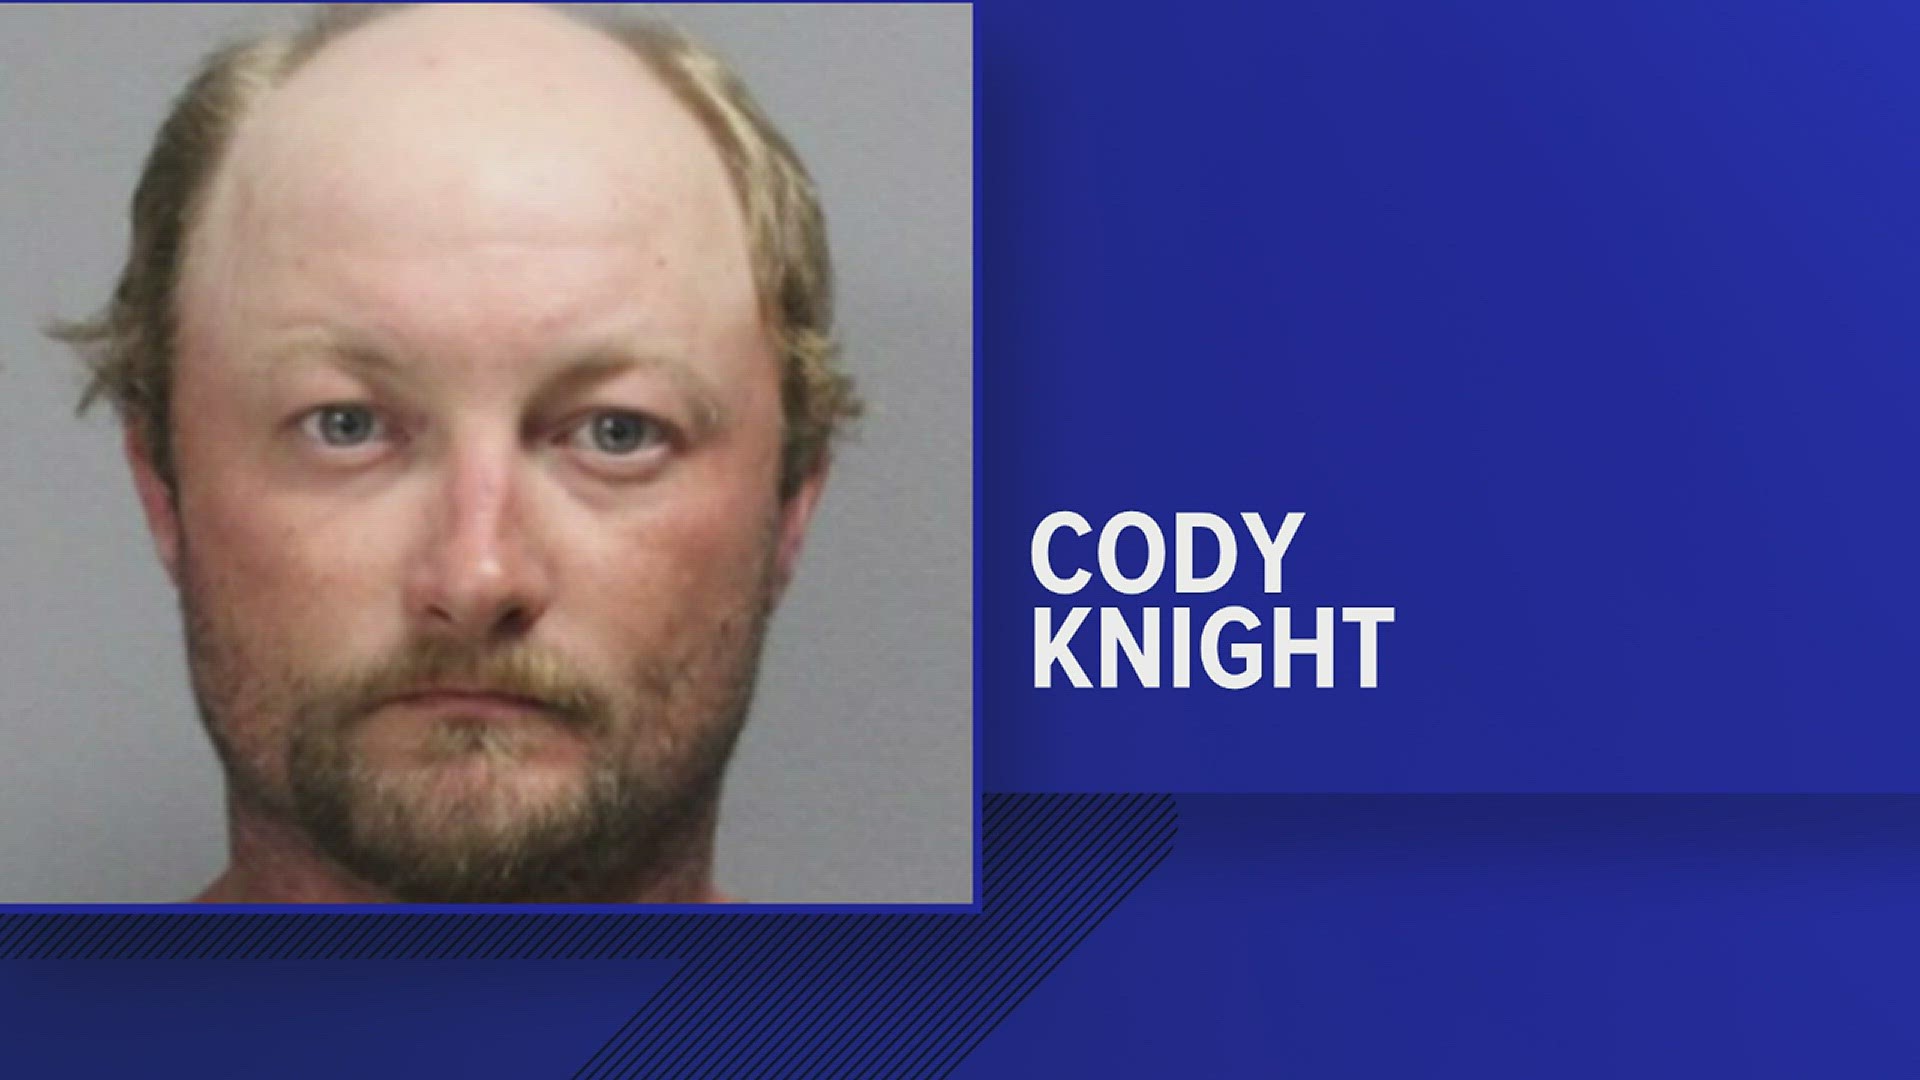 Cody Knight, 33, of Town Bluff area, was charged for shooting a Tyler County man.